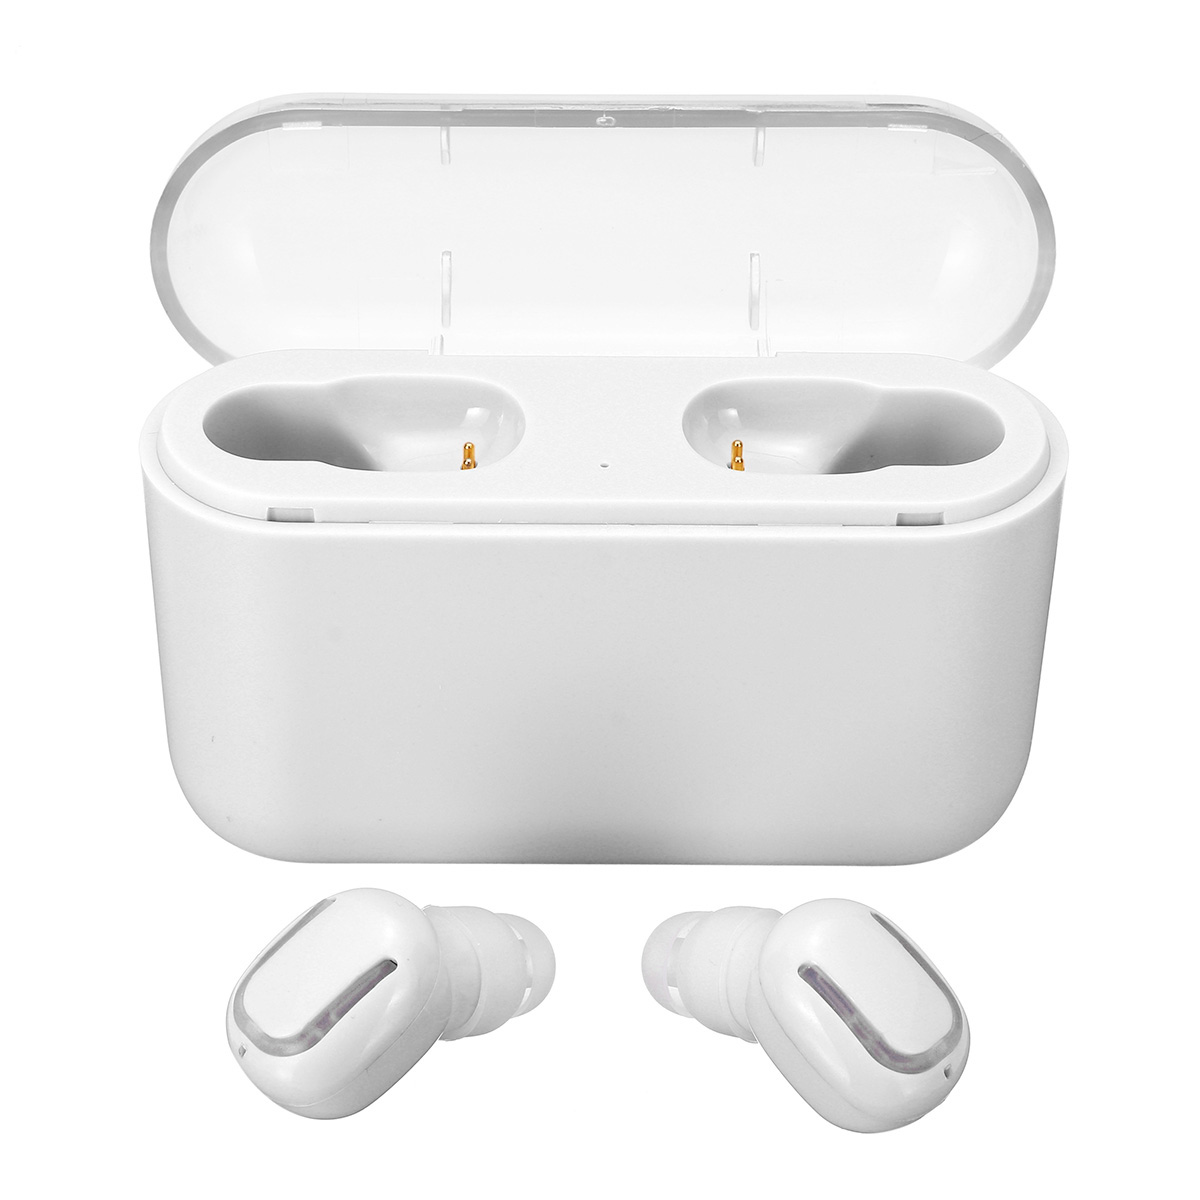 Find [bluetooth 5.0] TWS Earphone CVC6.0 Noise Cancelling 2200mAh Power Bank IPX5 Waterproof Headphone with Mic for Sale on Gipsybee.com with cryptocurrencies